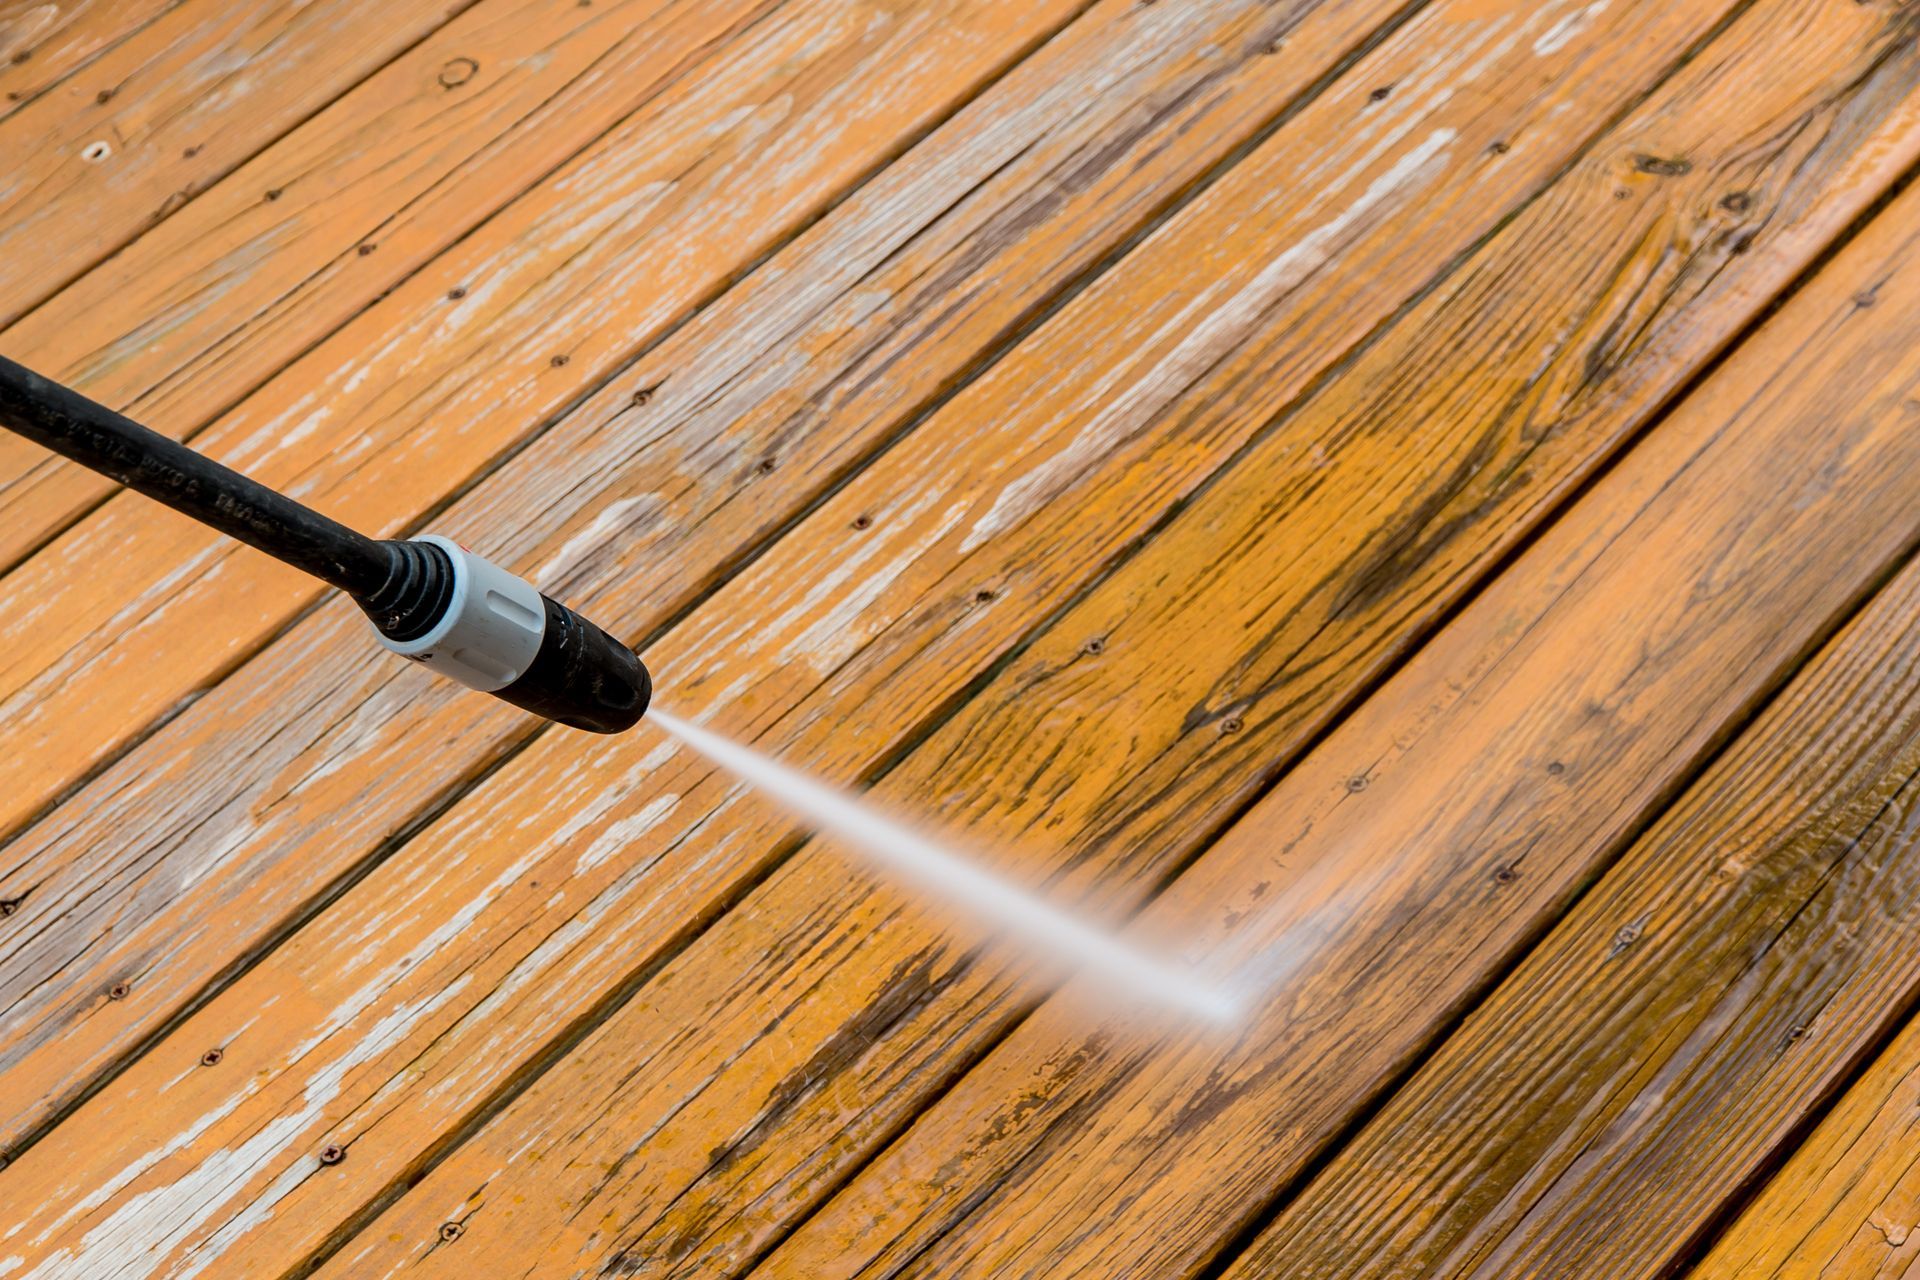 a person is using a high pressure washer to clean a wooden deck .